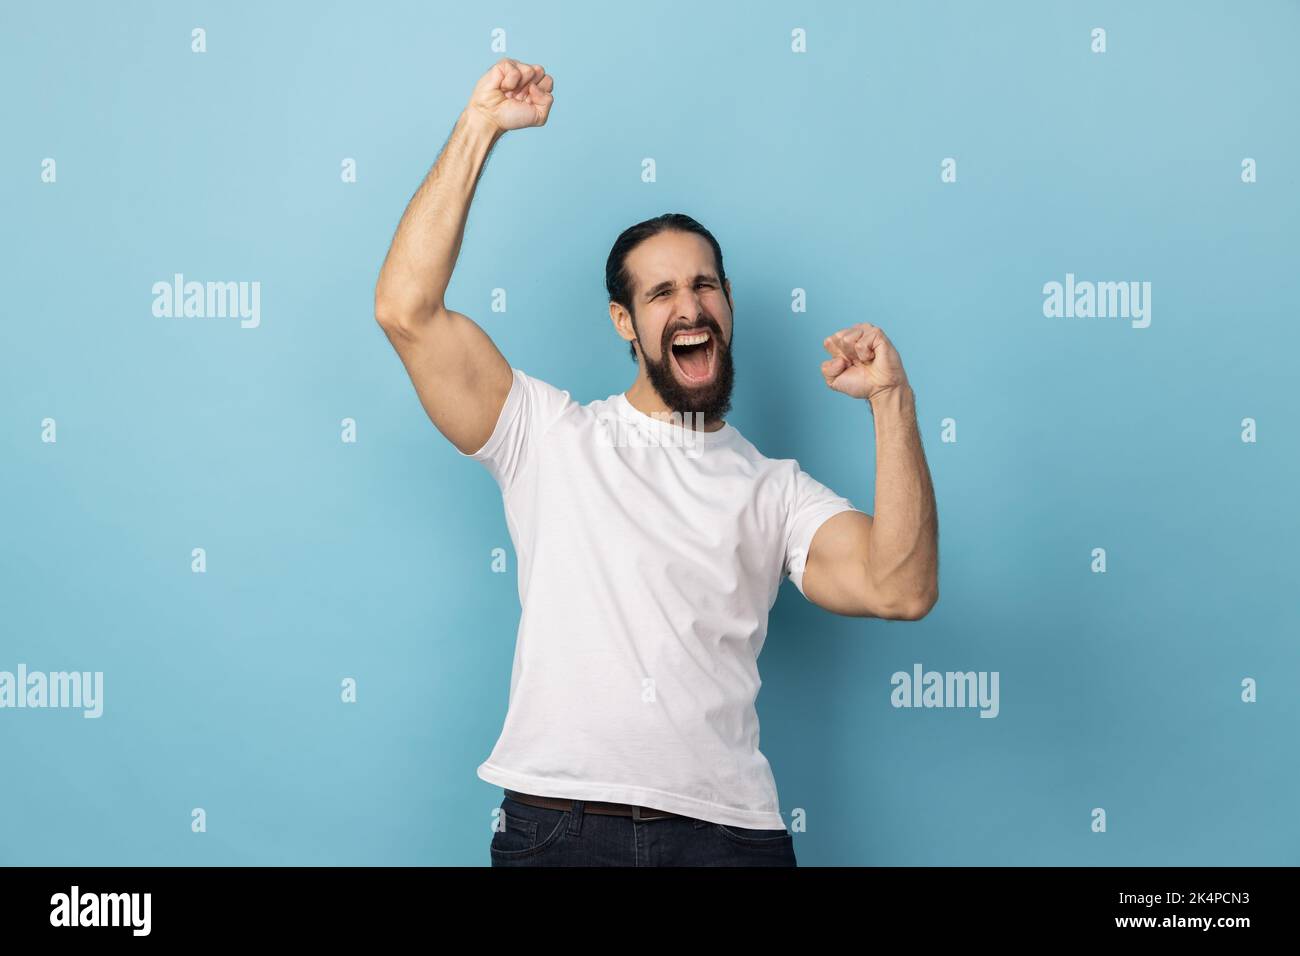 Portrait of excited man with beard wearing white T-shirt expressing winning gesture with raised fists and screaming, celebrating victory. Indoor studio shot isolated on blue background. Stock Photo